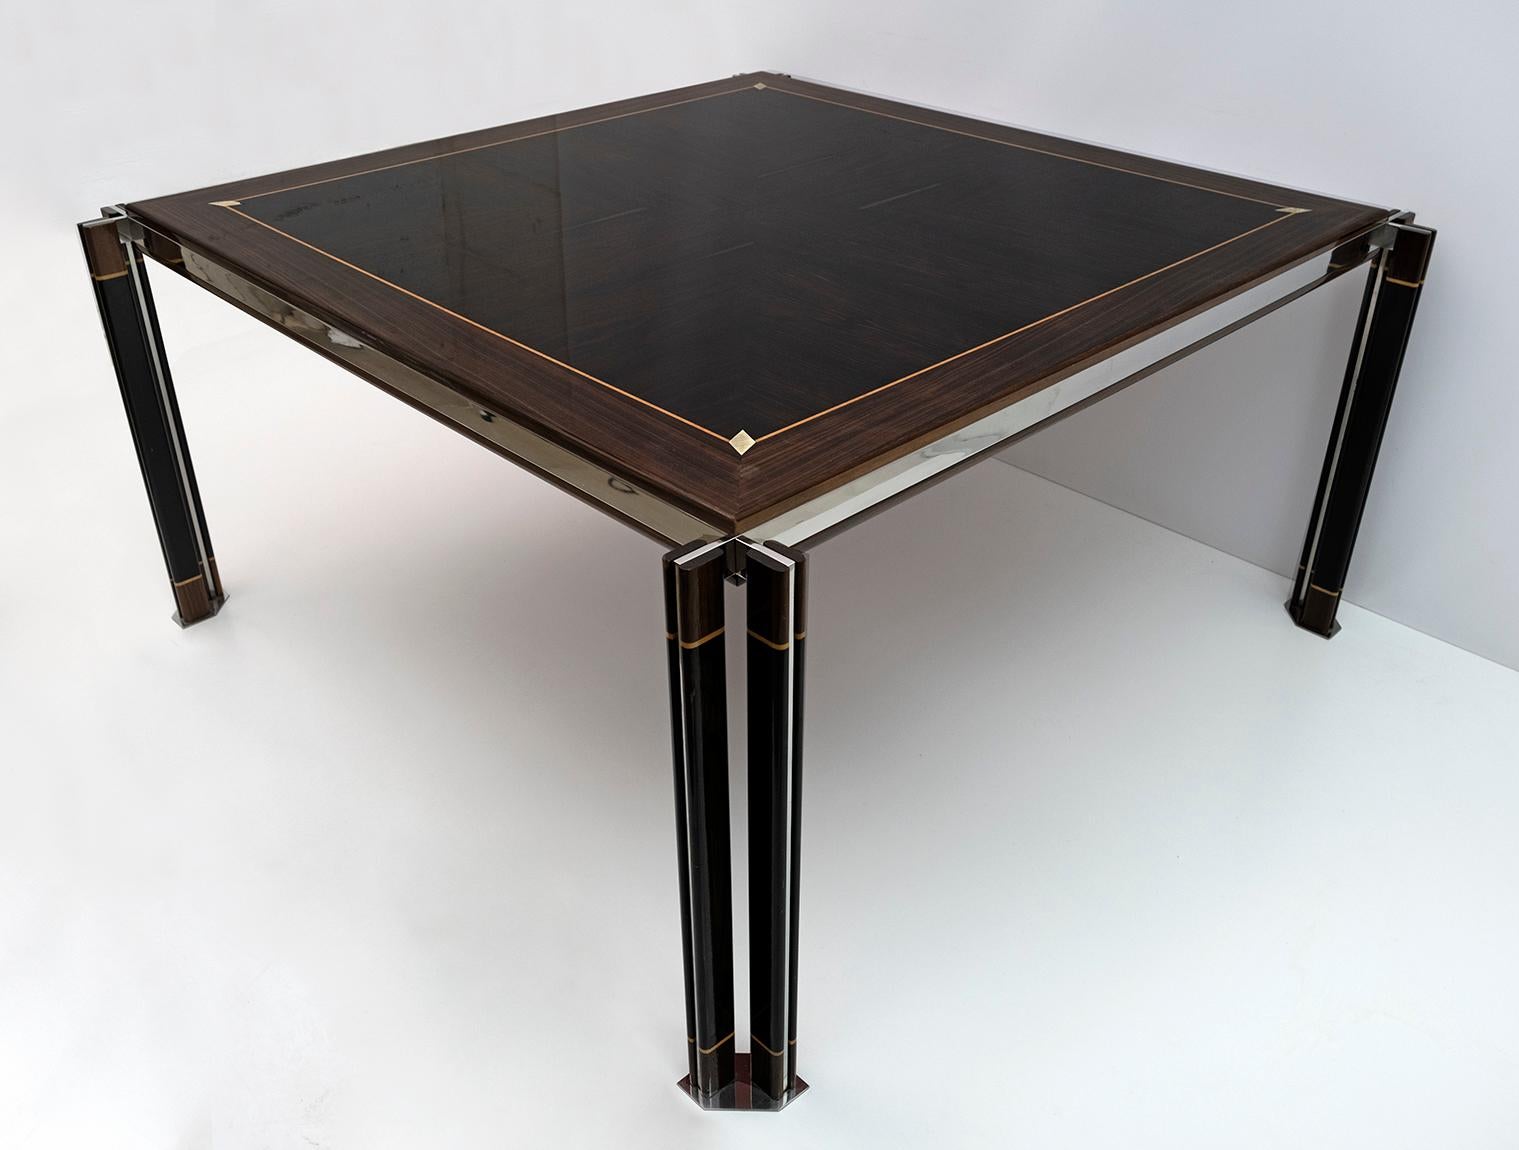 A large square Italian dining table designed by Paolo Barracchia. Featuring exquisite detailing including a thick brass band, double open legs and maple inlays. Manufactured by Roman Deco.